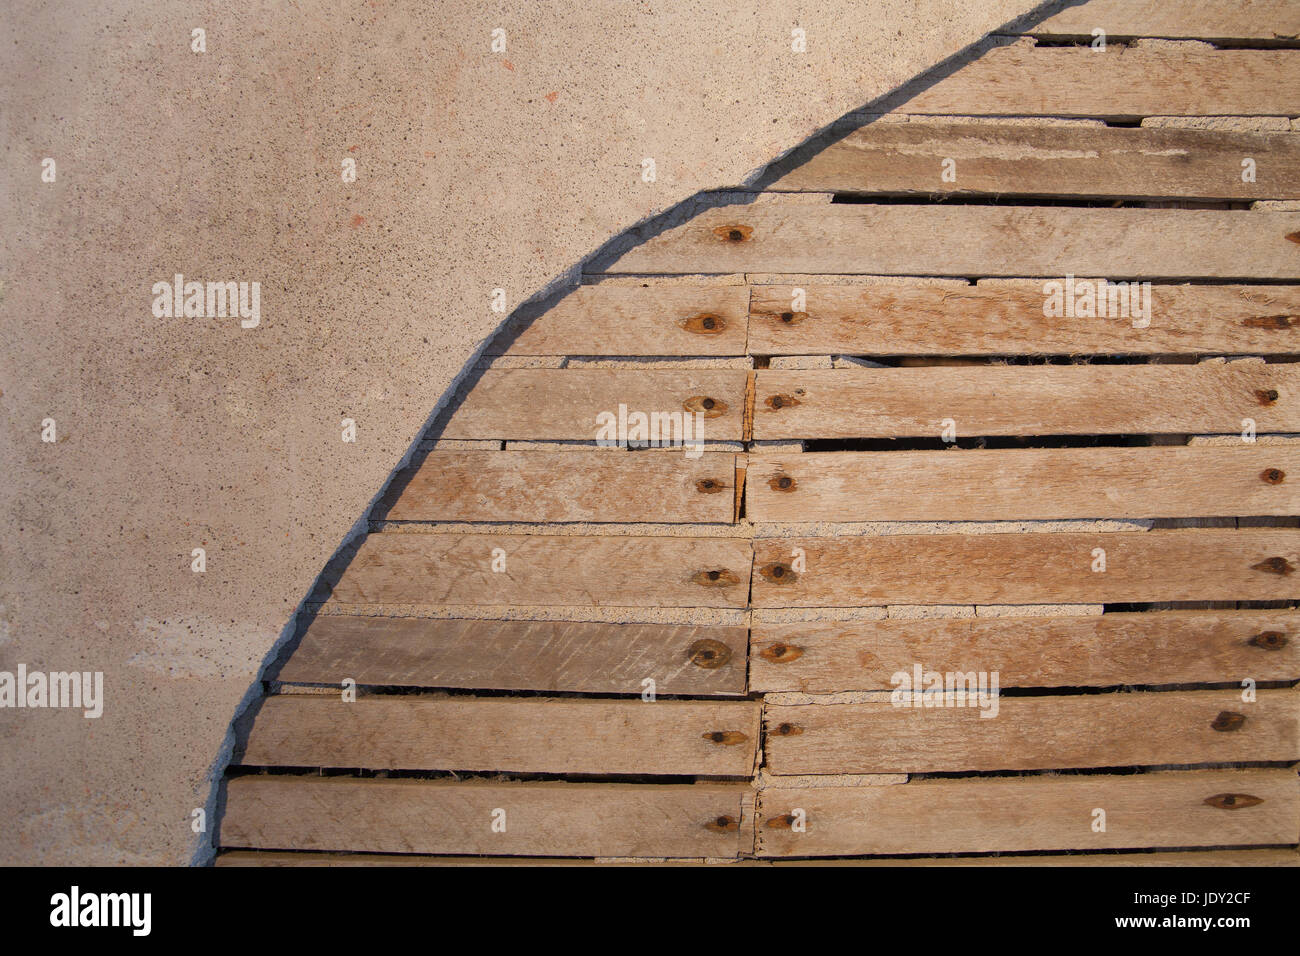 Abstract wood lattice wall and plaster. Gritty textured damaged background. Stock Photo